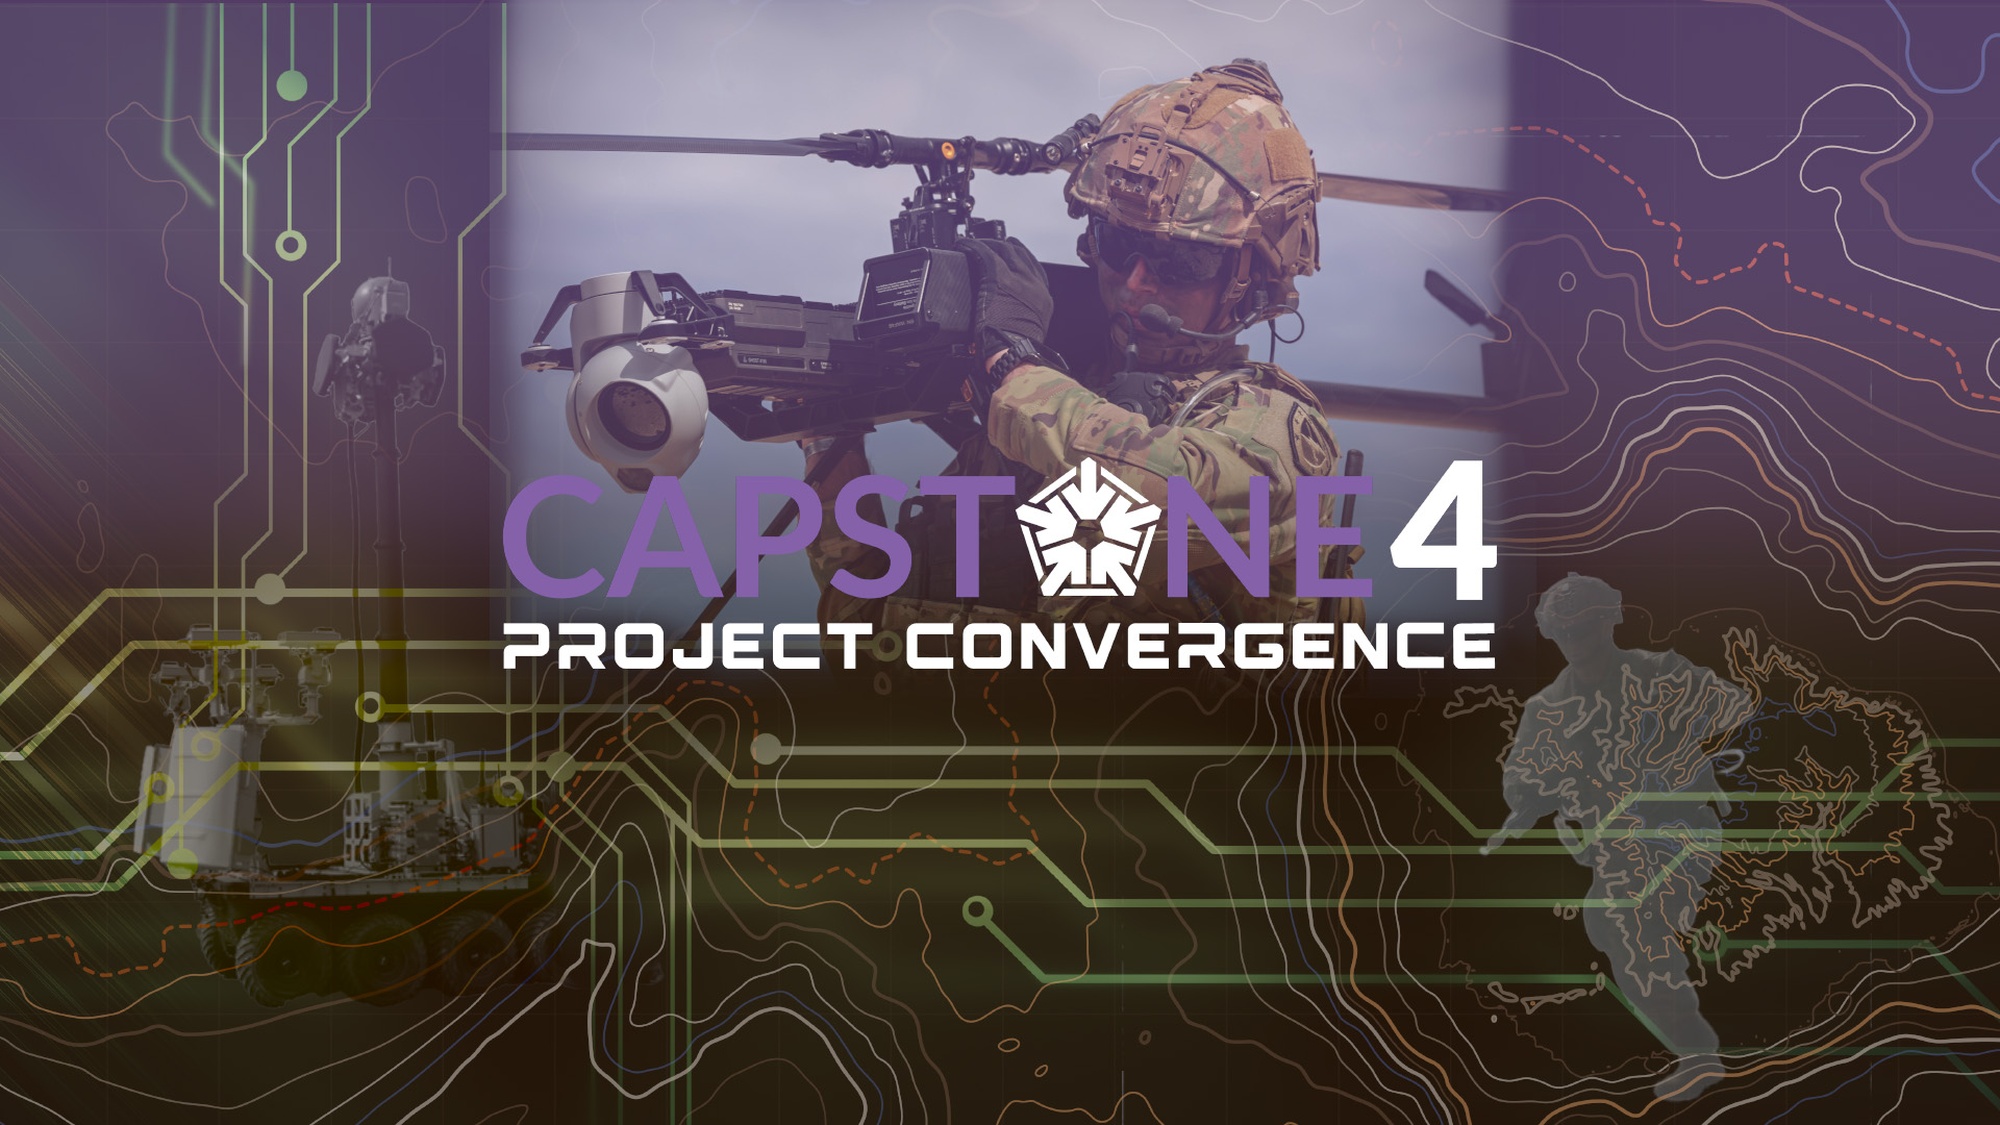 A soldier holds a device with the Project Convergence Capstone 4 logo beneath with stylized background.